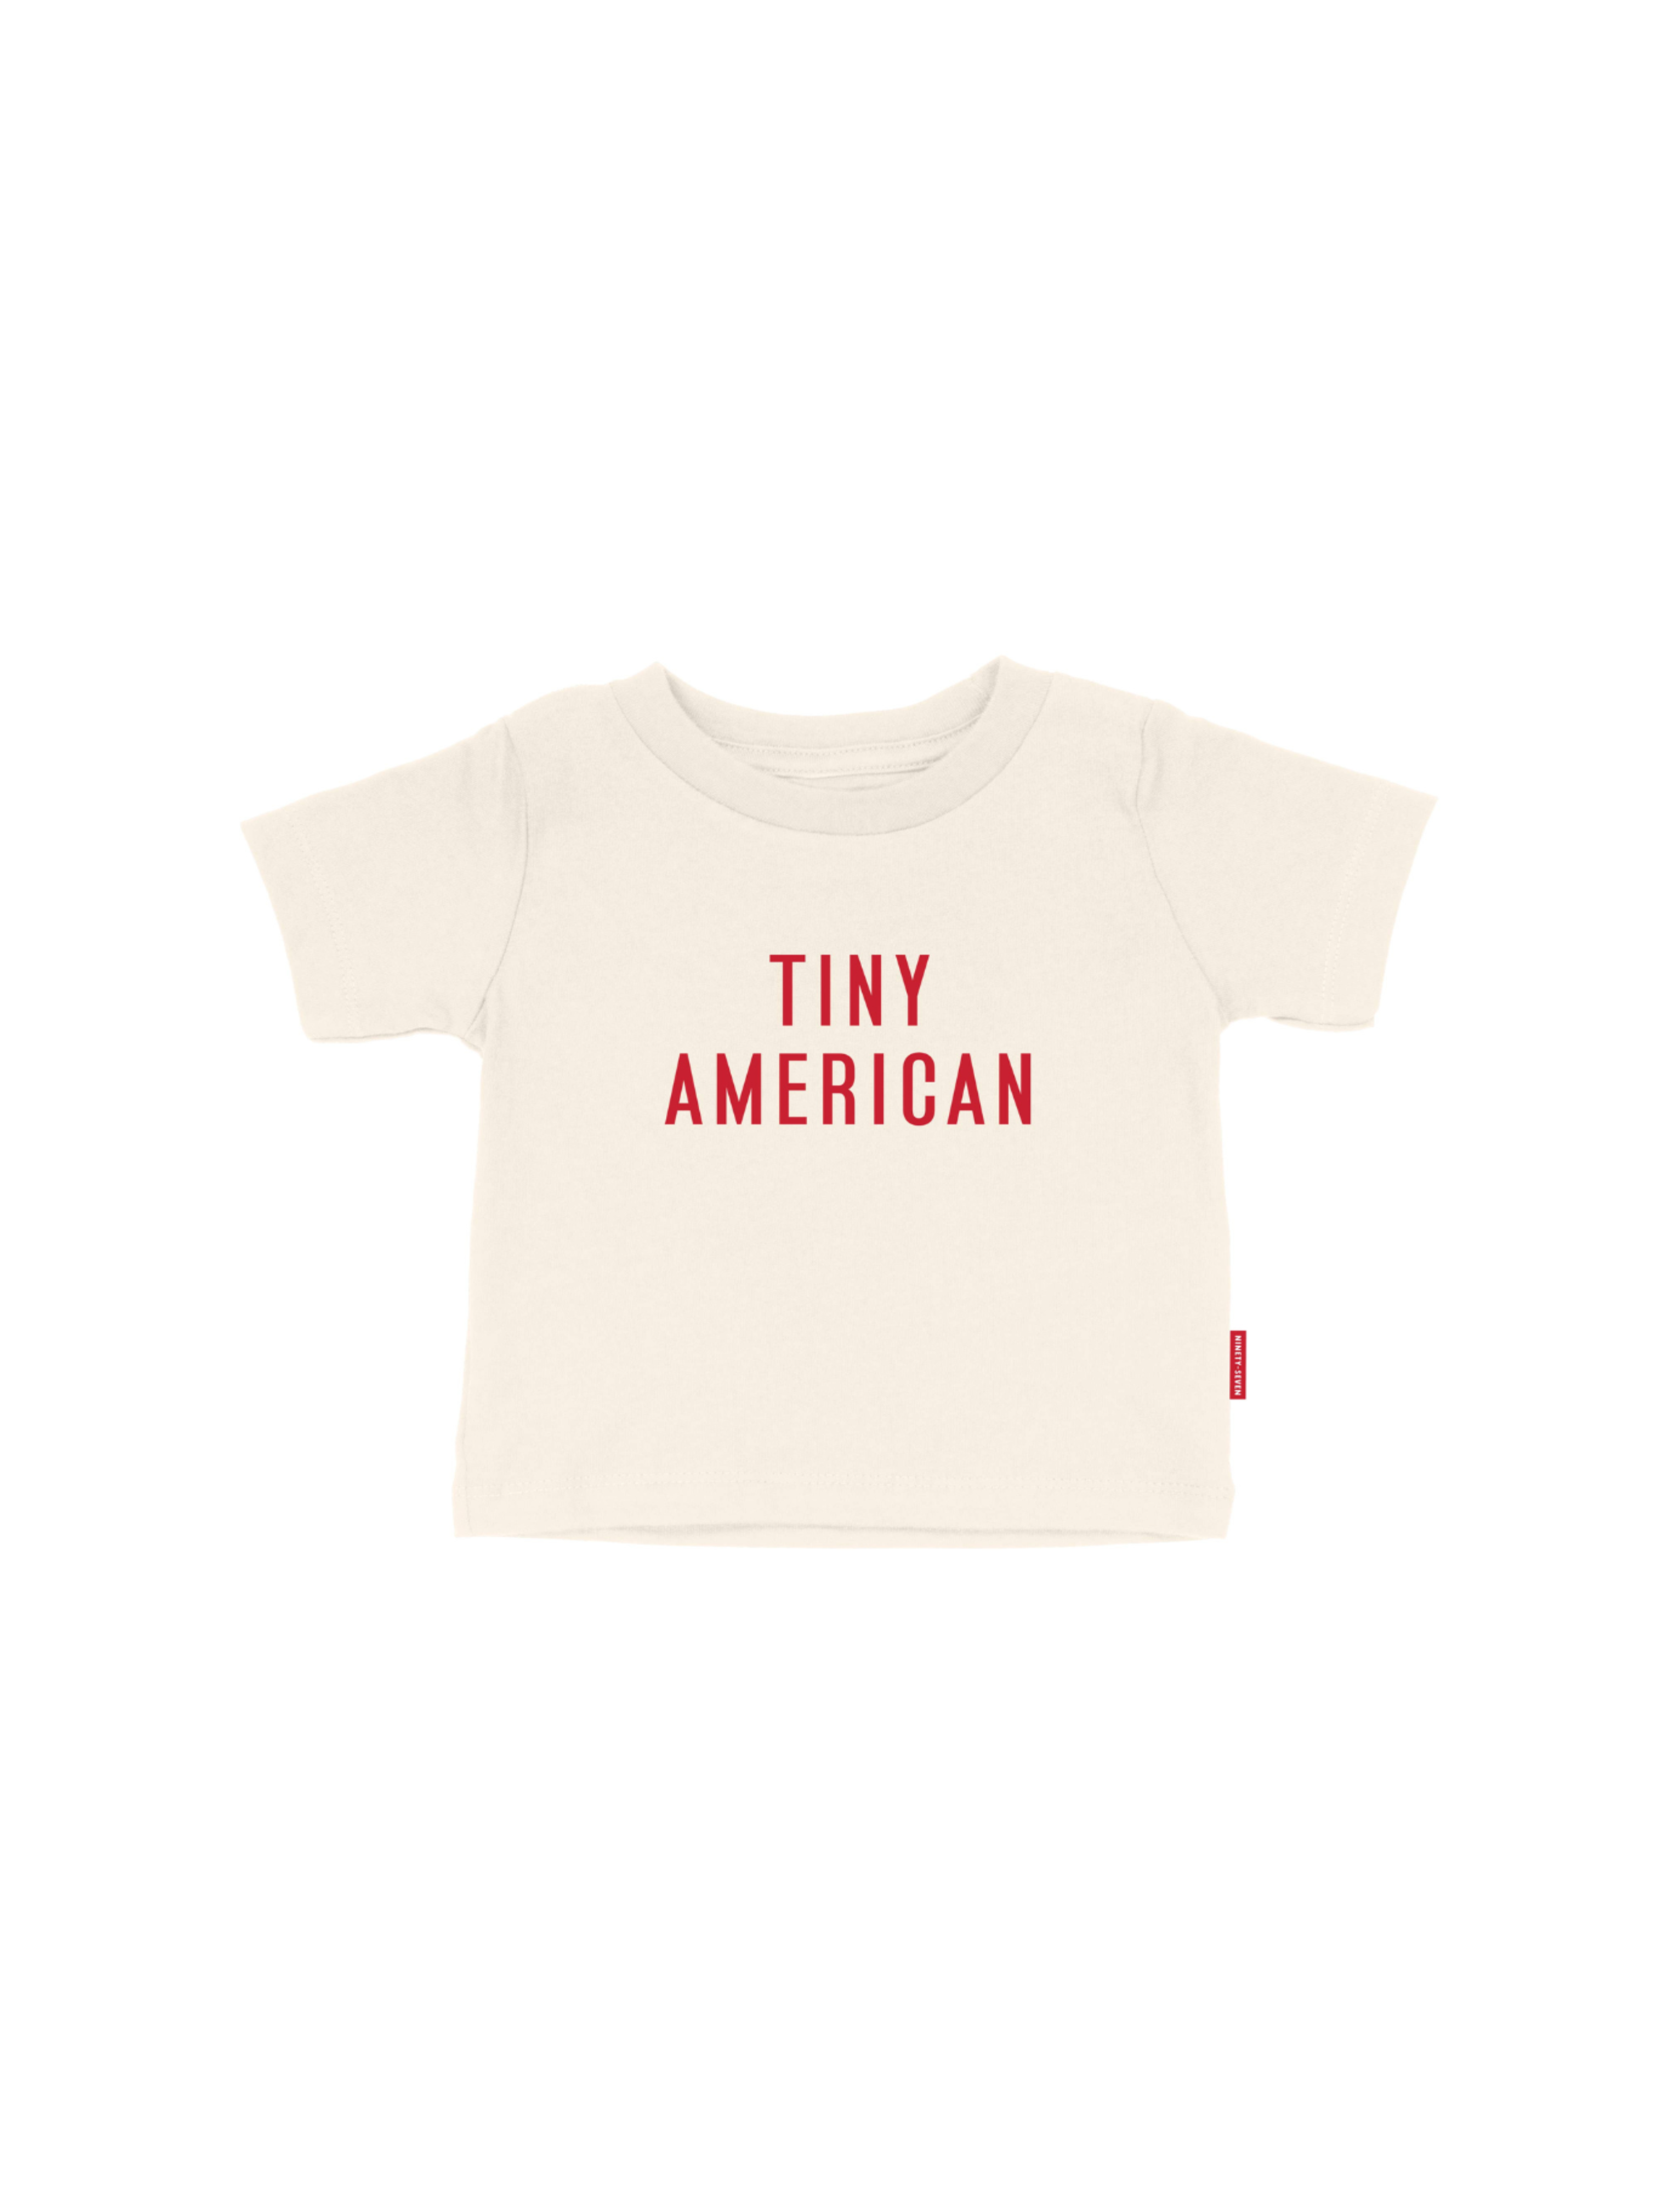 97 Design Co. - Tiny American - Kids T-shirt, 4th of July, USA Toddler Tee